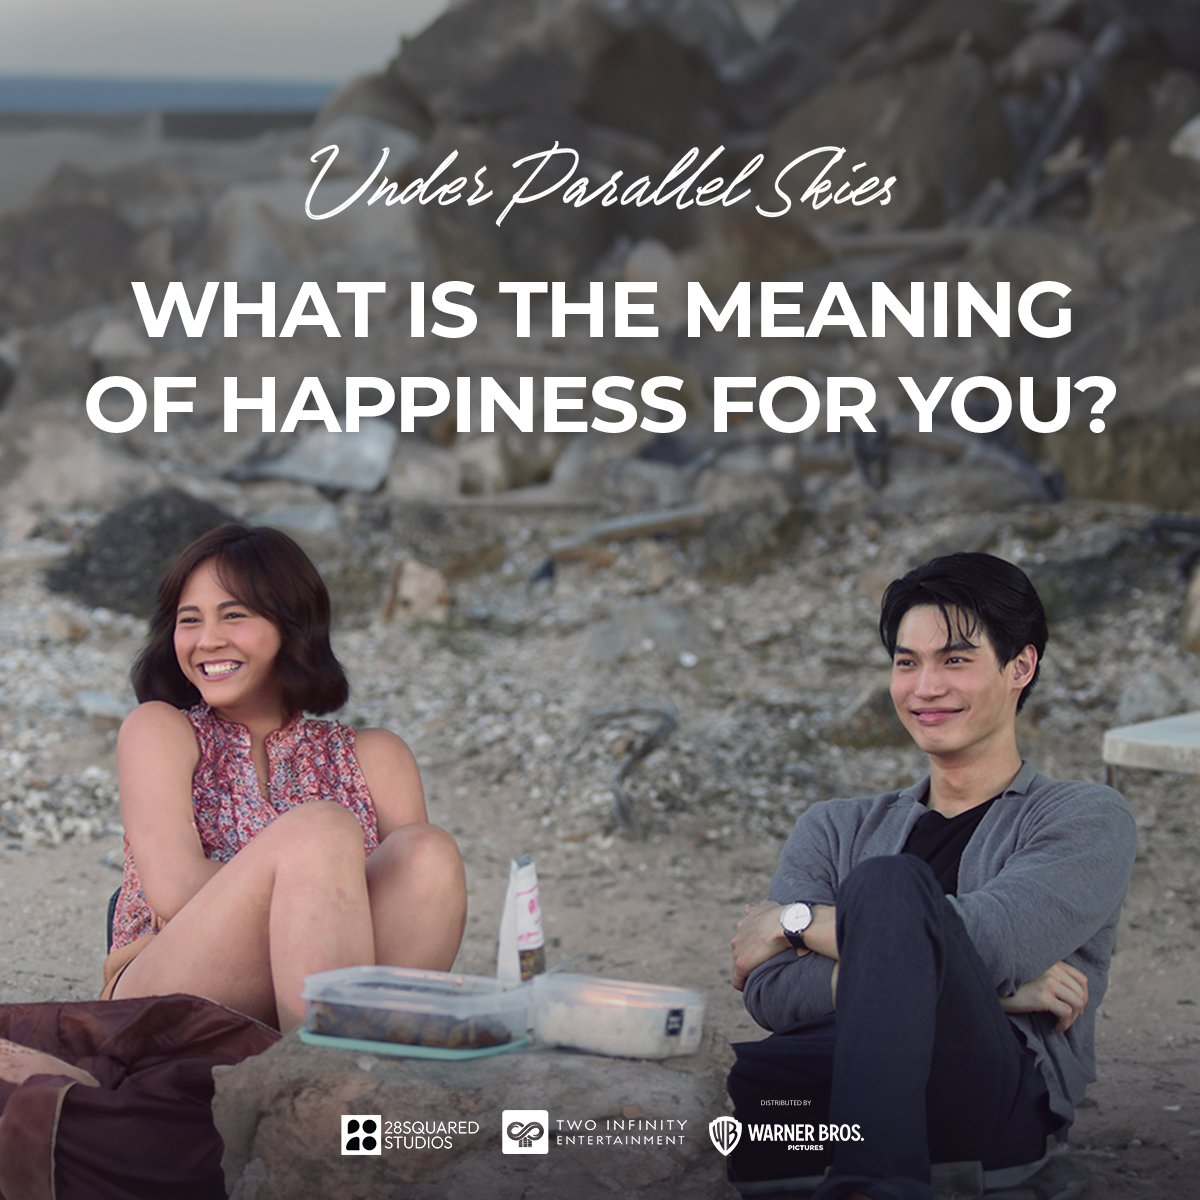 One of the main themes of 'Under Parallel Skies' is pursuing fai lok or happiness. So we would like to ask, what is the meaning of happiness for you?

Comment your answers. We'd love to read them! Catch Win Metawin and Janella Salvador in #UnderParallelSkies showing now in